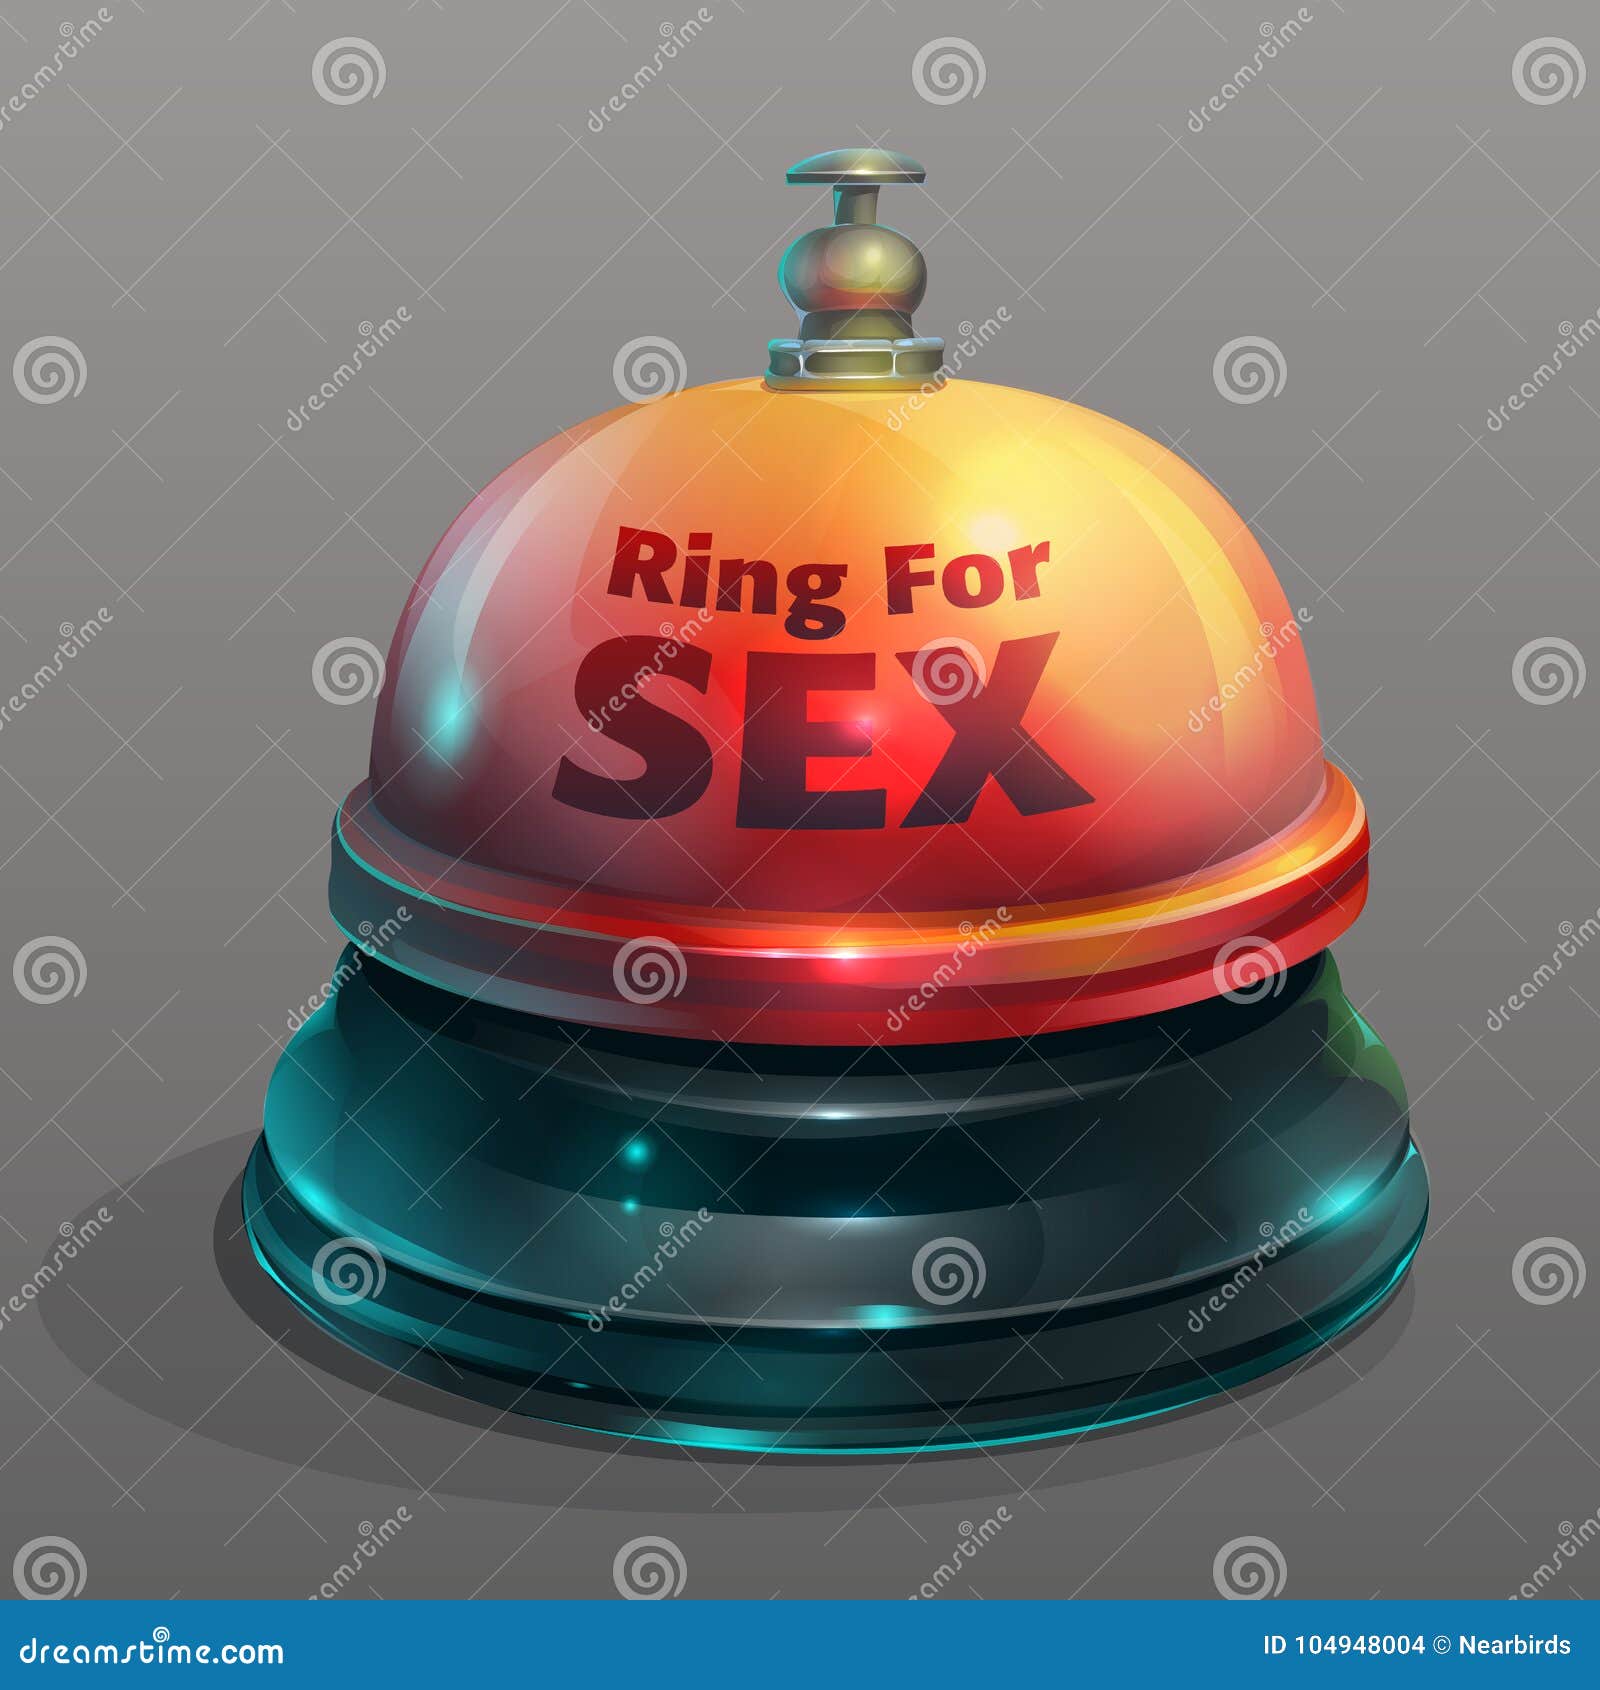 TOYANDONA Sex Bell Party Toy Novelty Romantic Toy for Lovers Metal Bell Table Bell Wedding Restaurant Hotel Home Ornament Red 